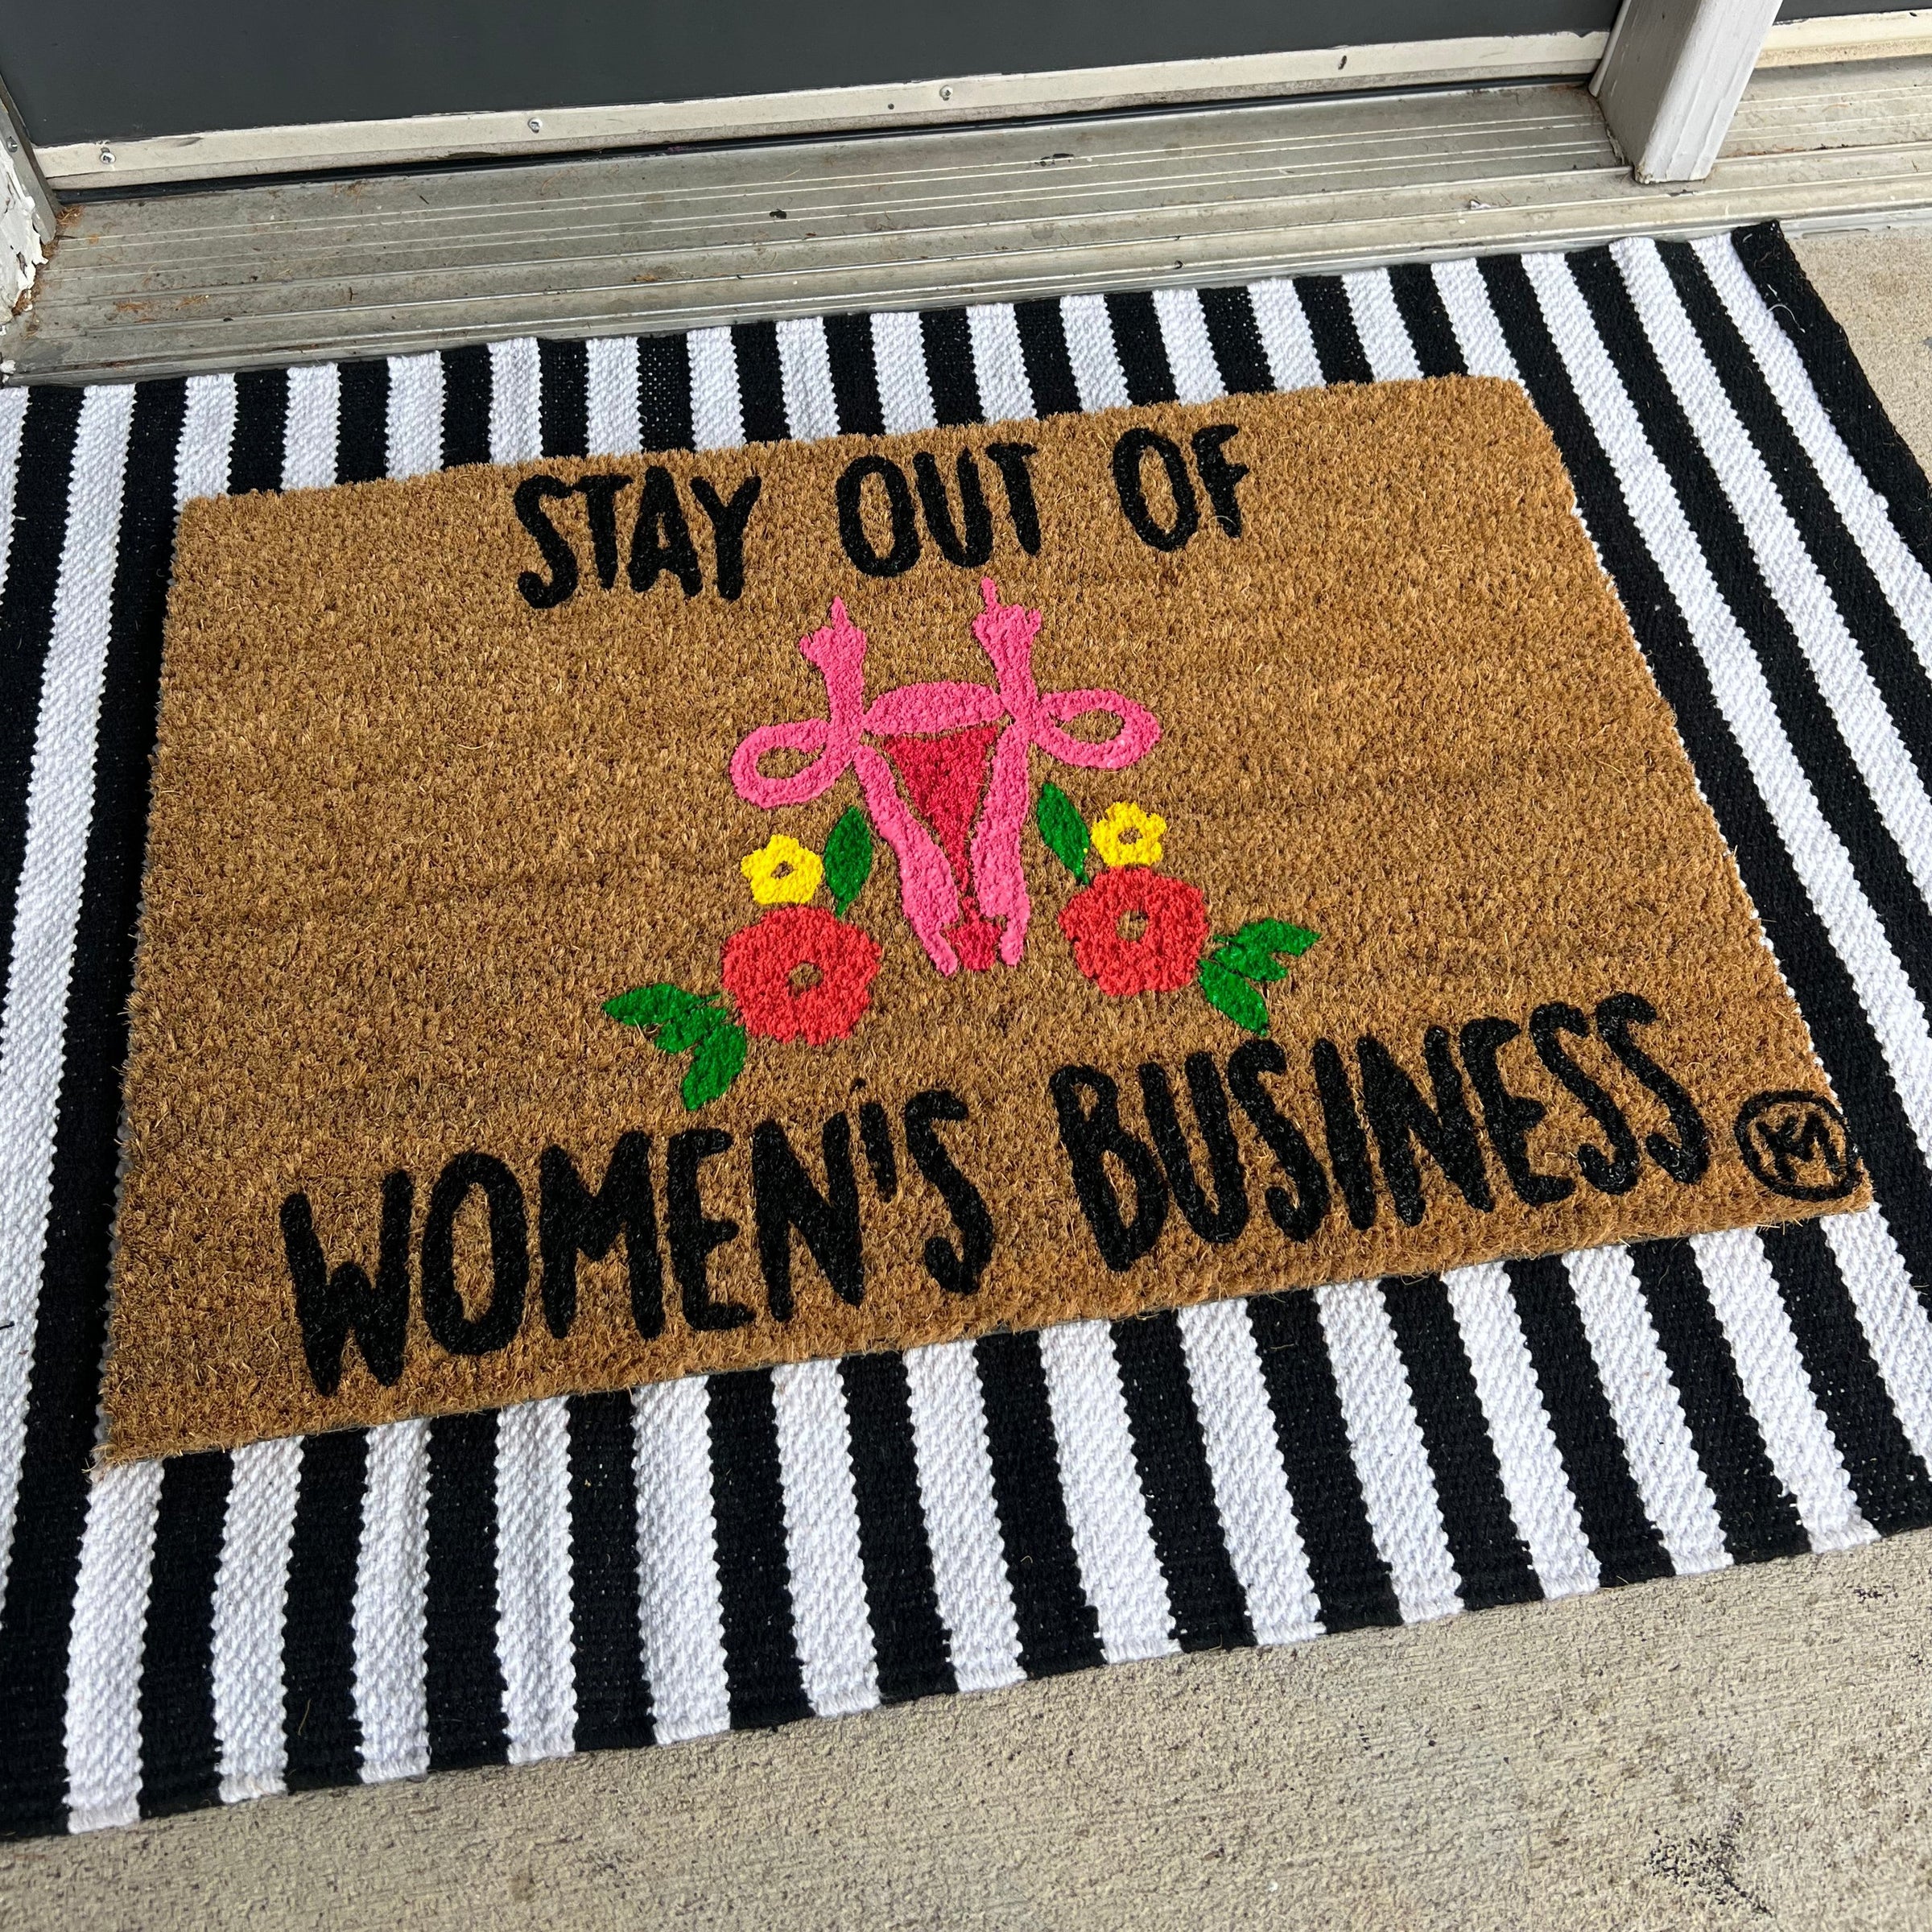 STAY OUT OF WOMENS BUSINESS MAT – Kicky Mats